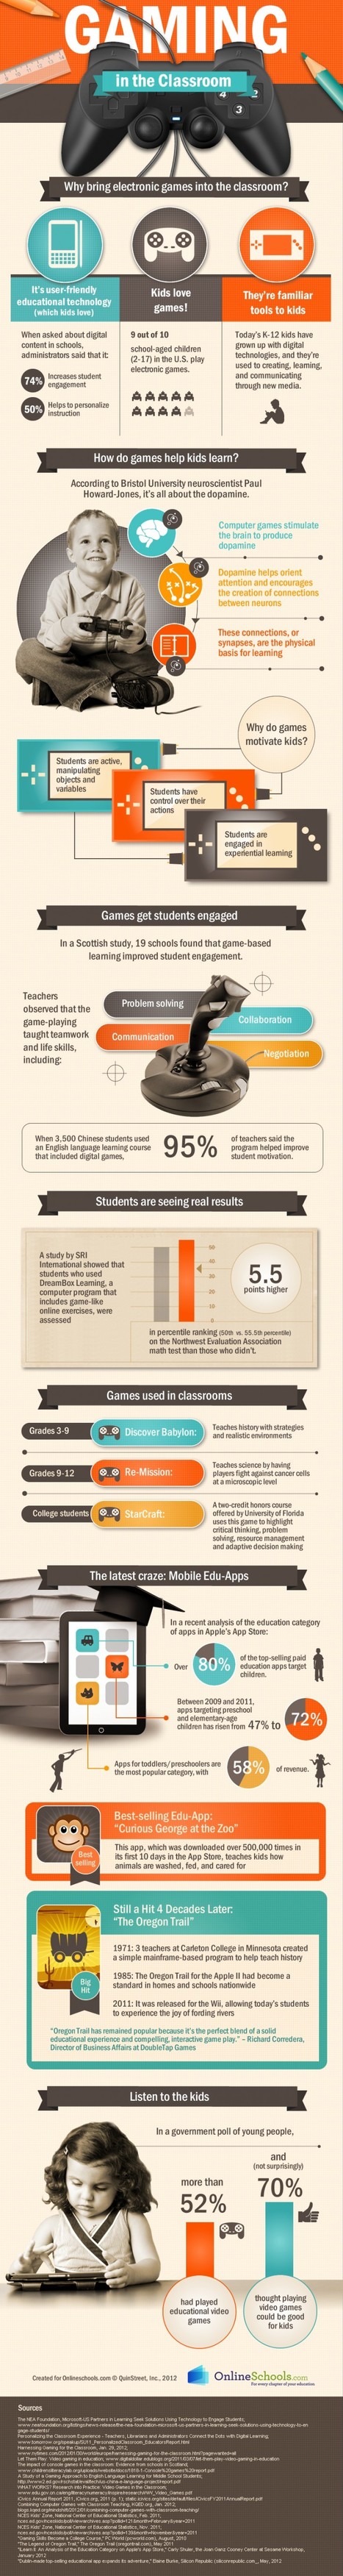 A Must-Have Guide To Gaming In The Classroom - with an interesting Infographic | Didactics and Technology in Education | Scoop.it